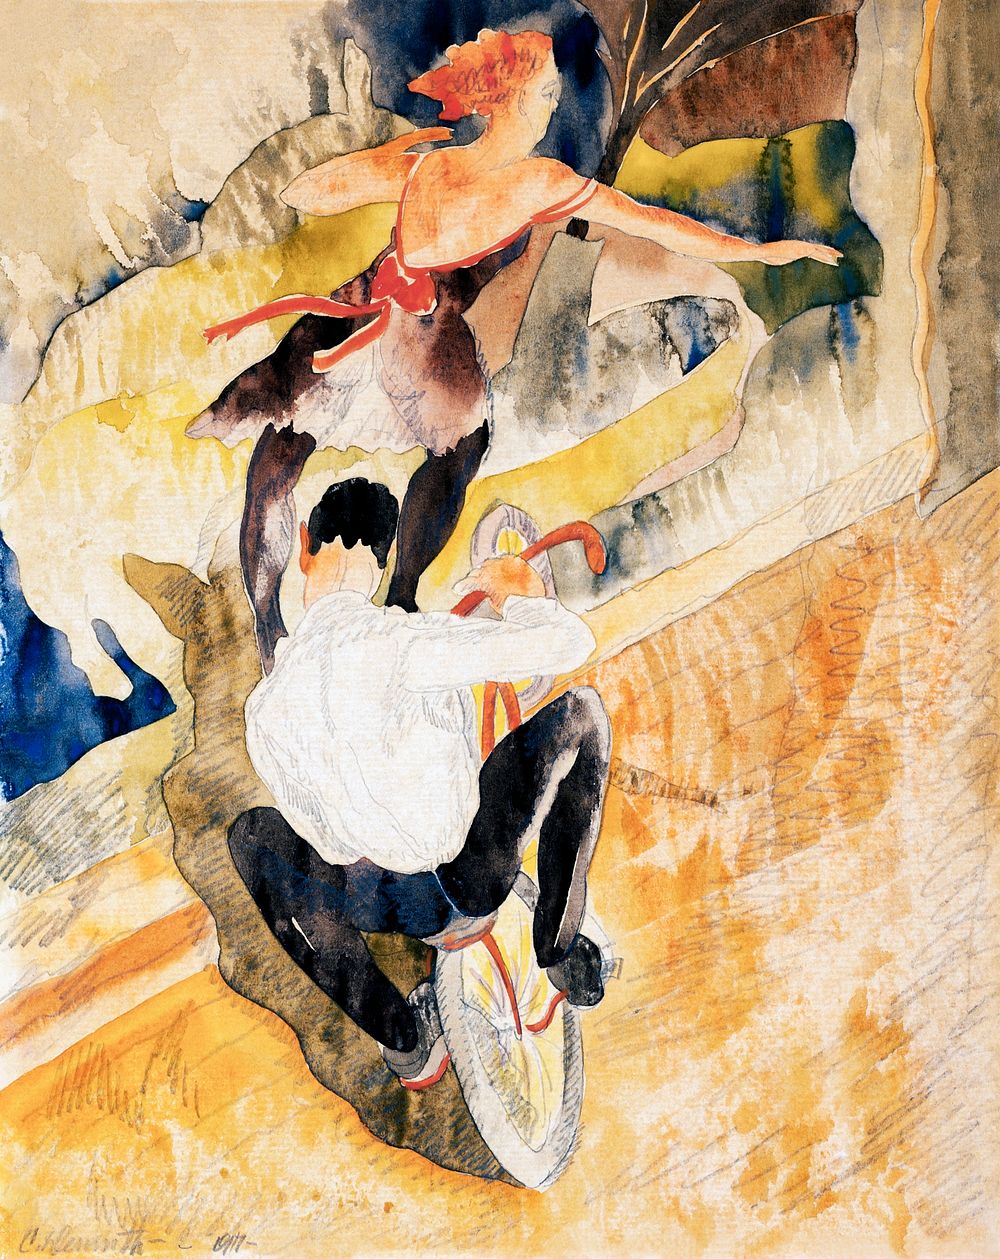 Bicycle Acrobats (1917) by Charles Demuth. Original from Barnes Foundation. Digitally enhanced by rawpixel.